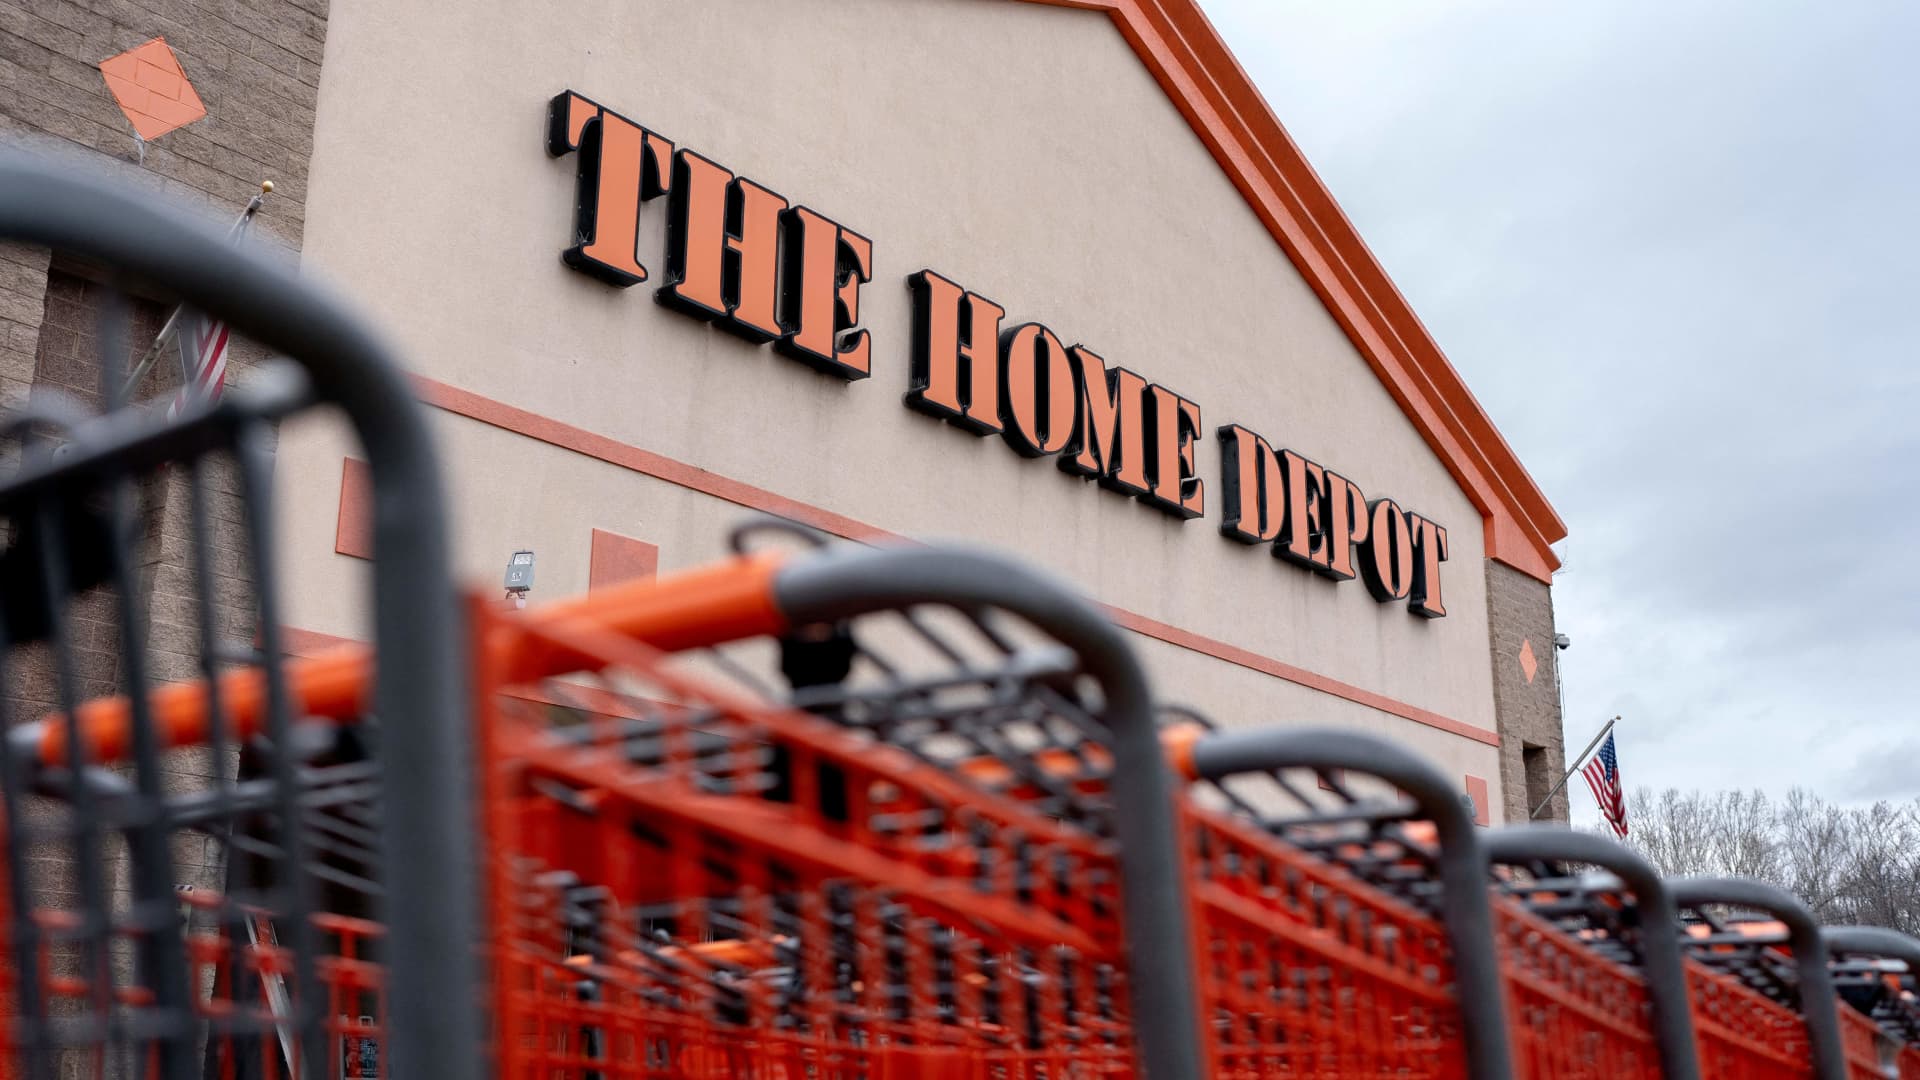 Home Depot and Lowe’s are booming in a housing market bust